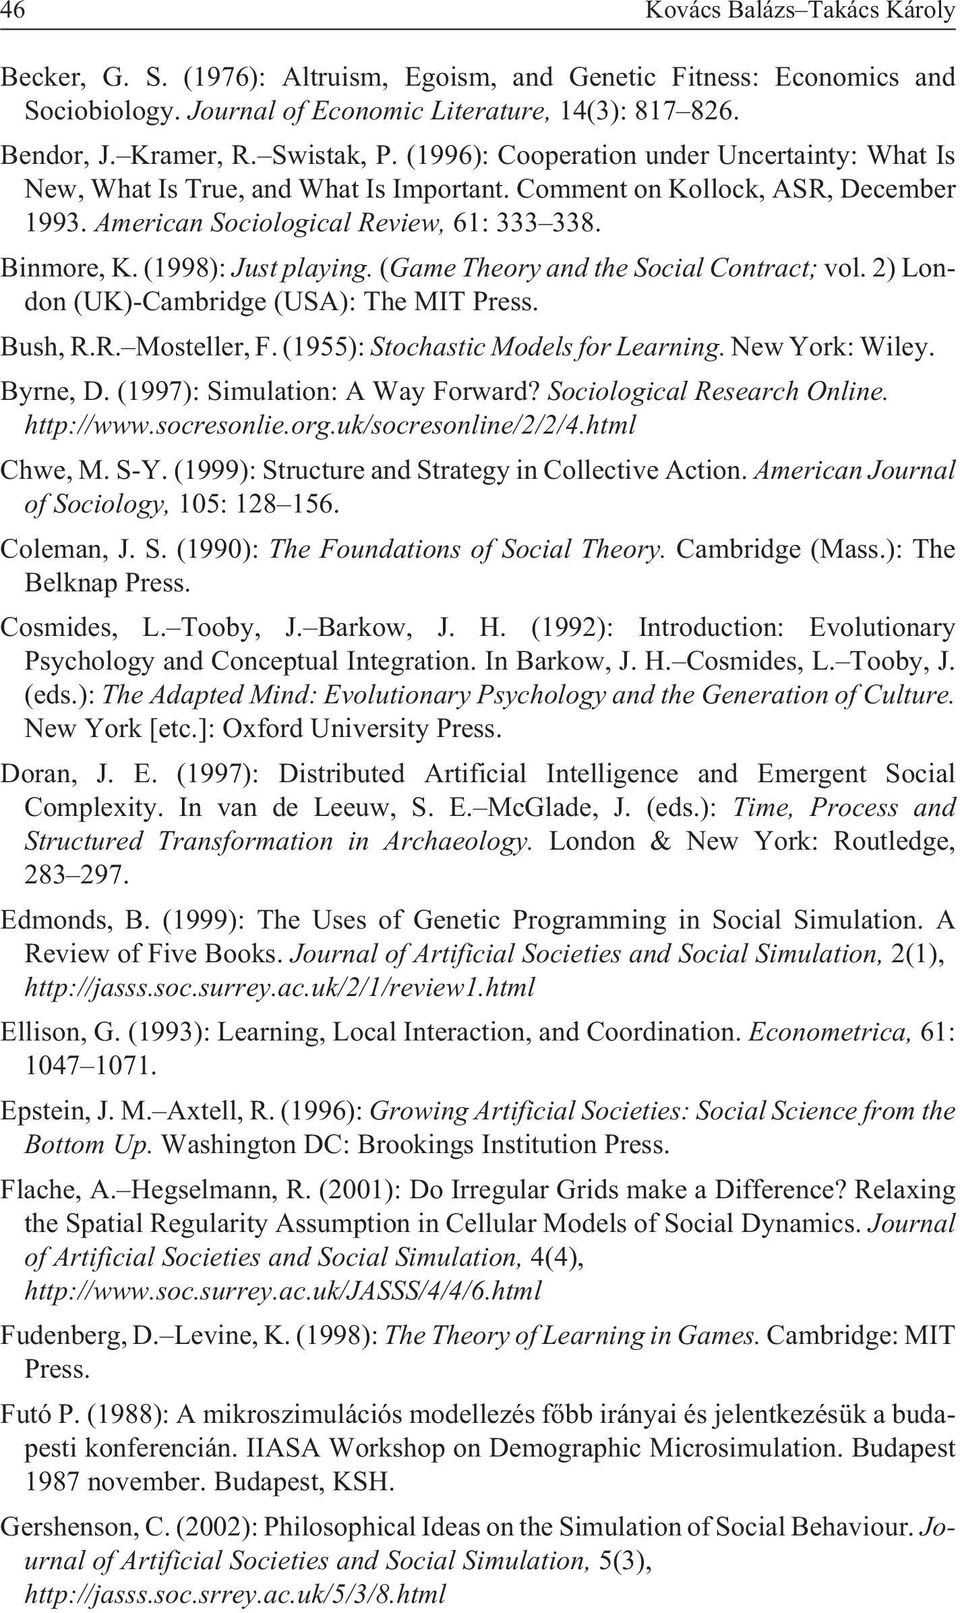 (1998): Just playing. (Game Theory and the Social Contract; vol. 2) London (UK)-Cambridge (USA): The MIT Press. Bush, R.R. Mosteller, F. (1955): Stochastic Models for Learning. New York: Wiley.